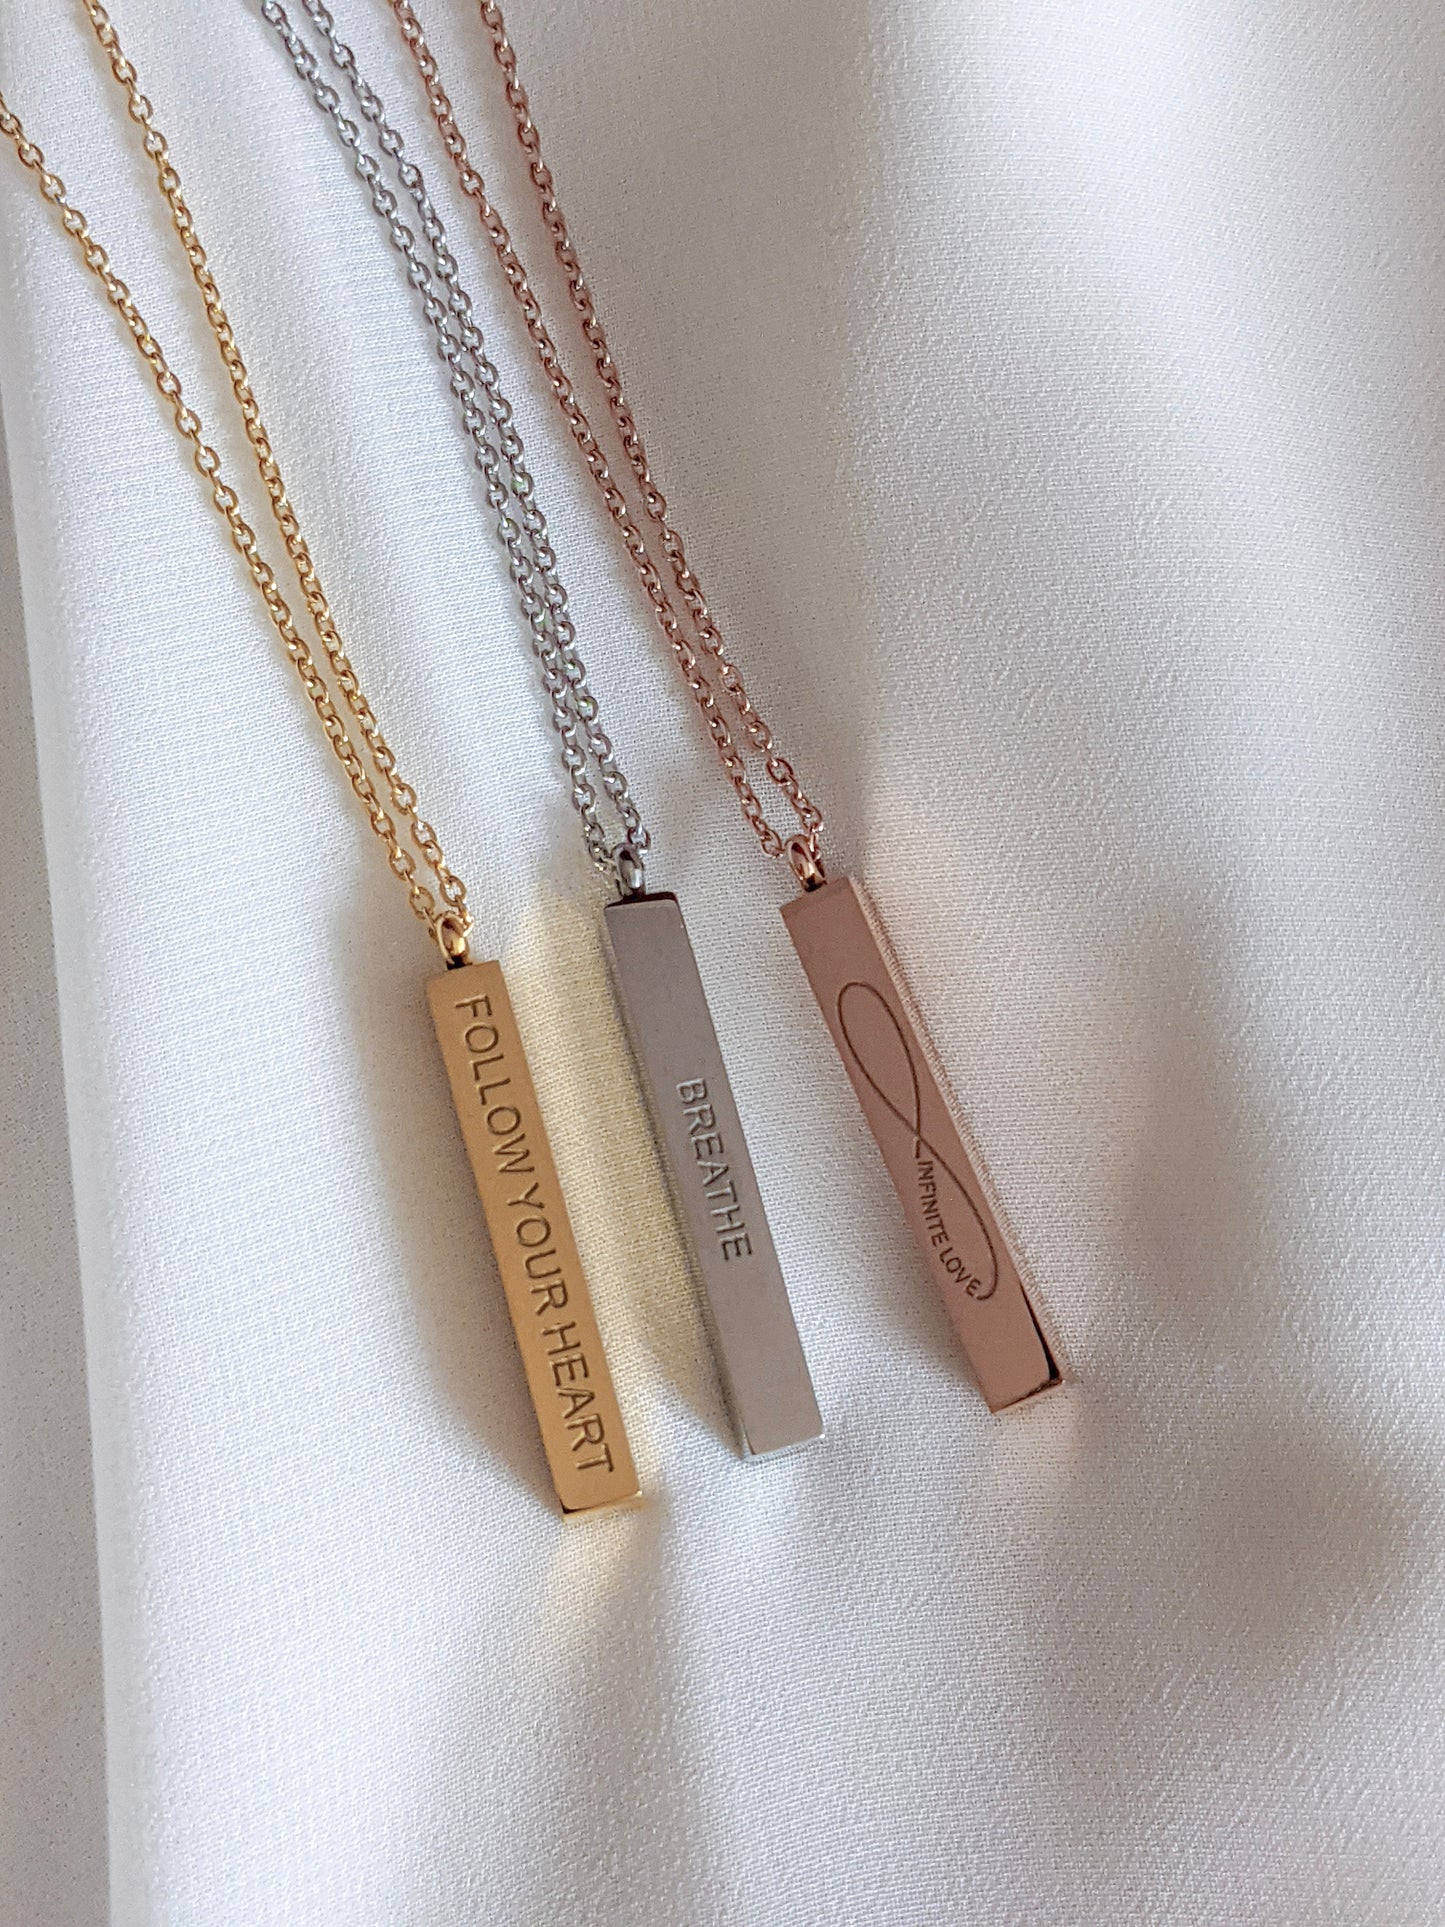 FOLLOW YOUR HEART | Necklace in gold